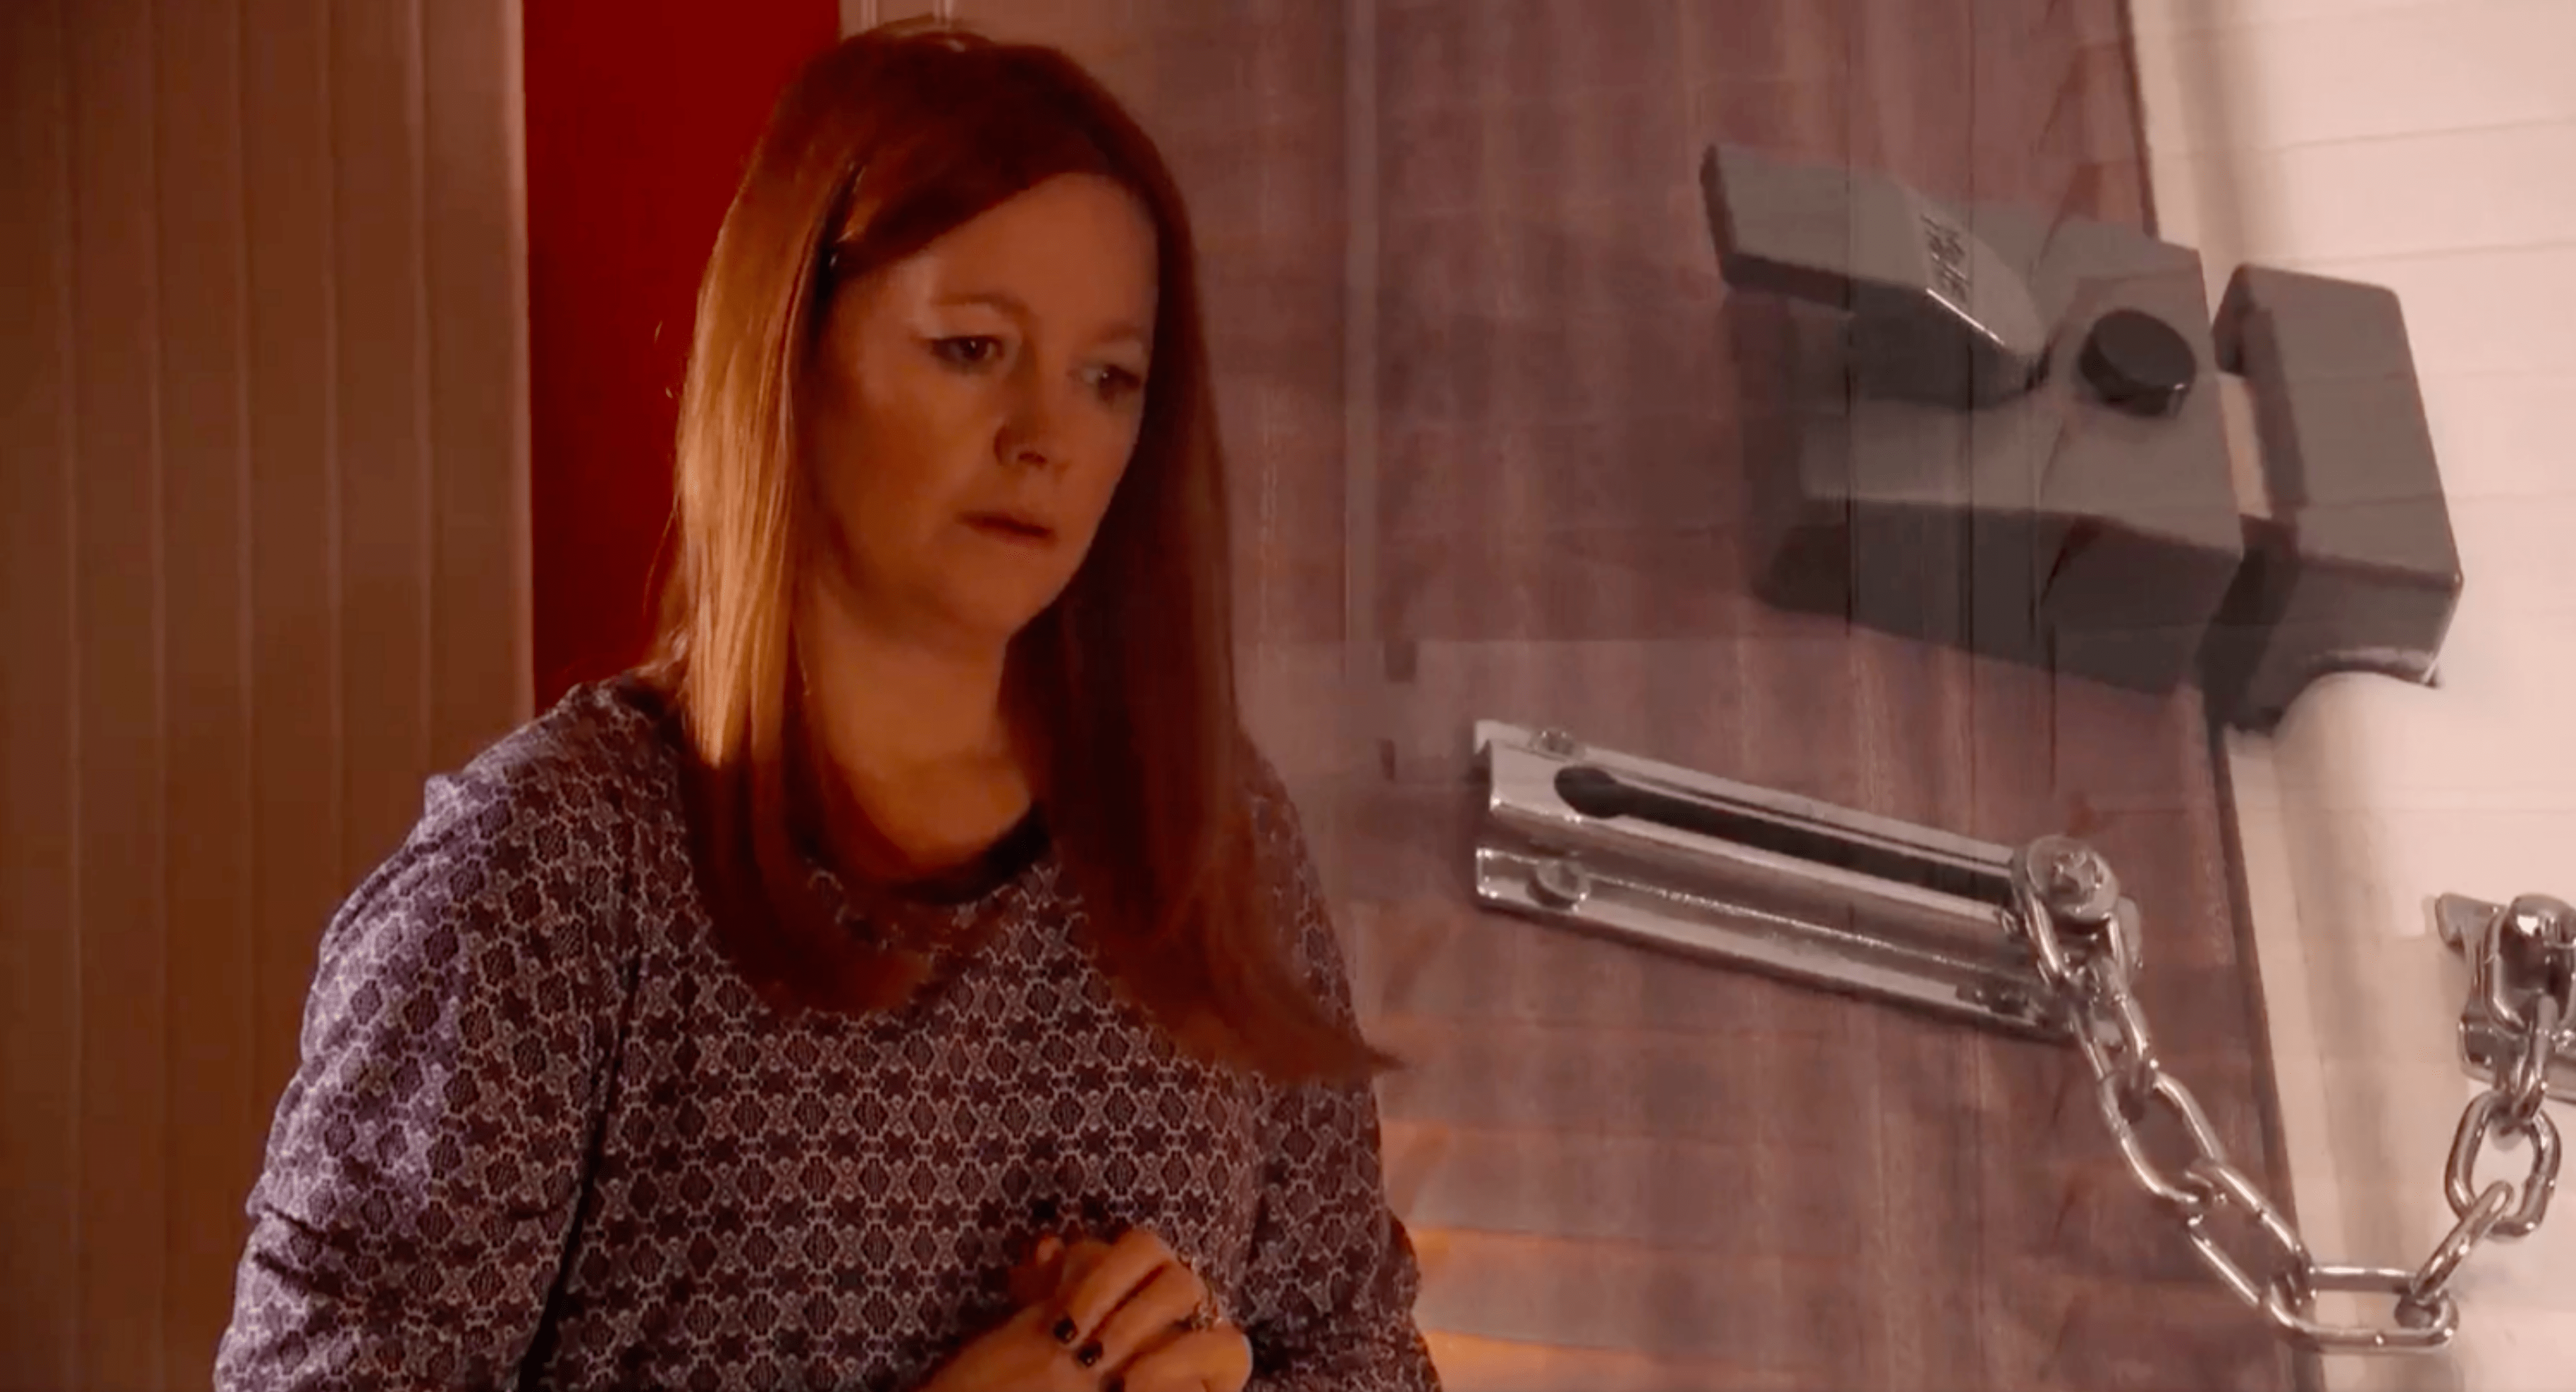 Hollyoaks spoilers: OCD story revealed for Diane Hutchinson?